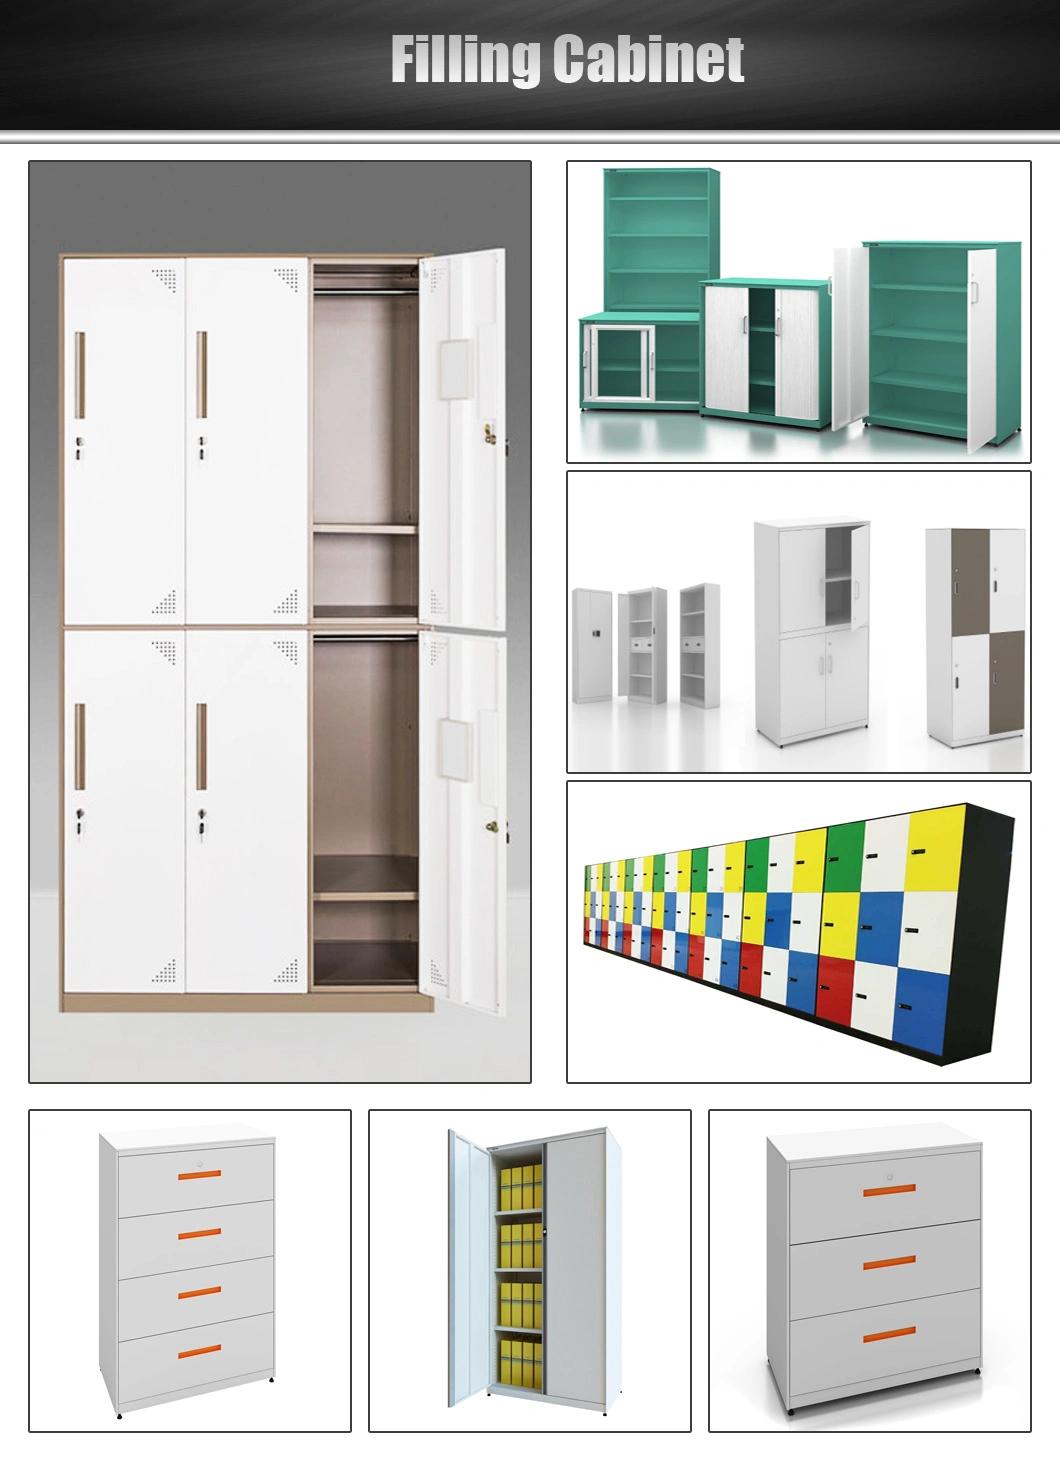 Utmost in Convenience Work Storage Cabinets with Environmentally-Friendly Materials